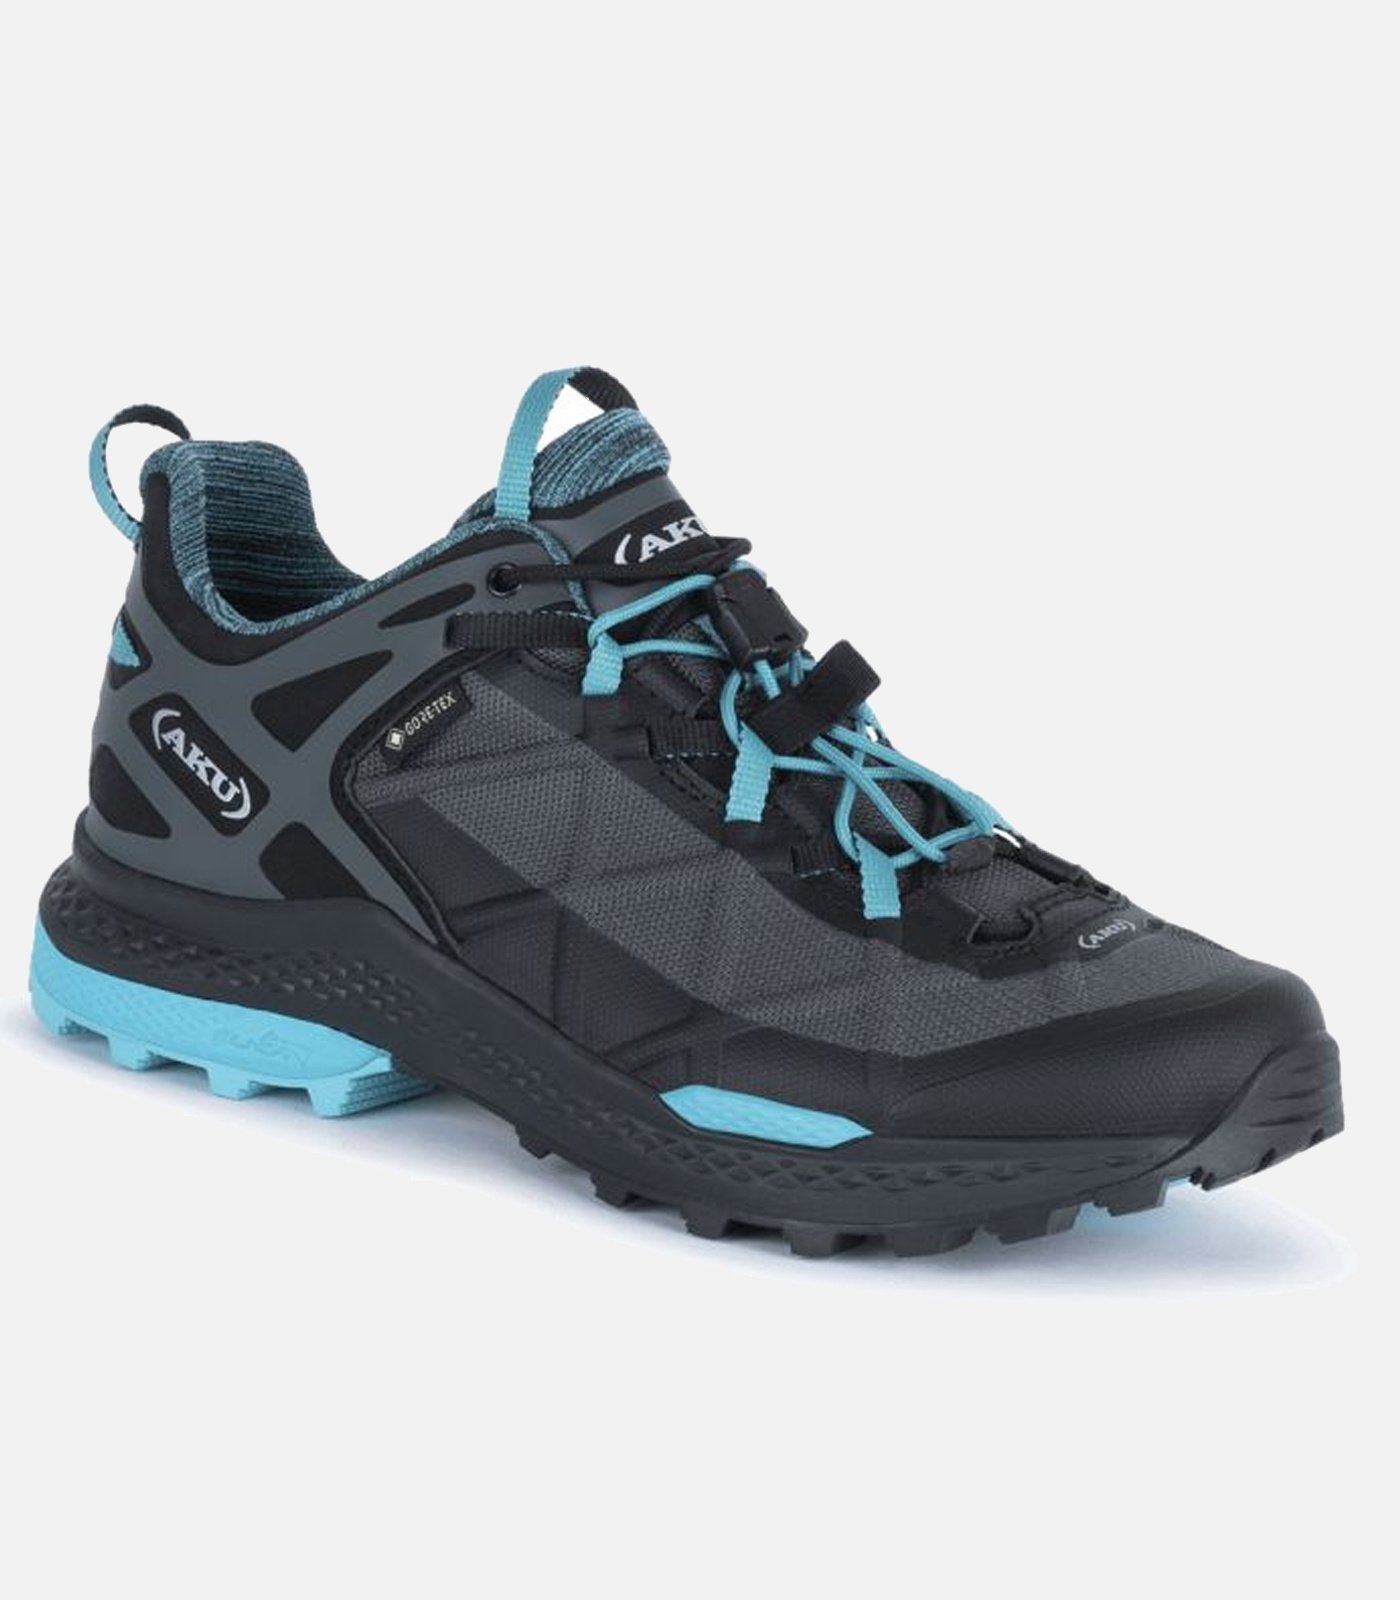 AKU low top hiking boots with Dual Fix System